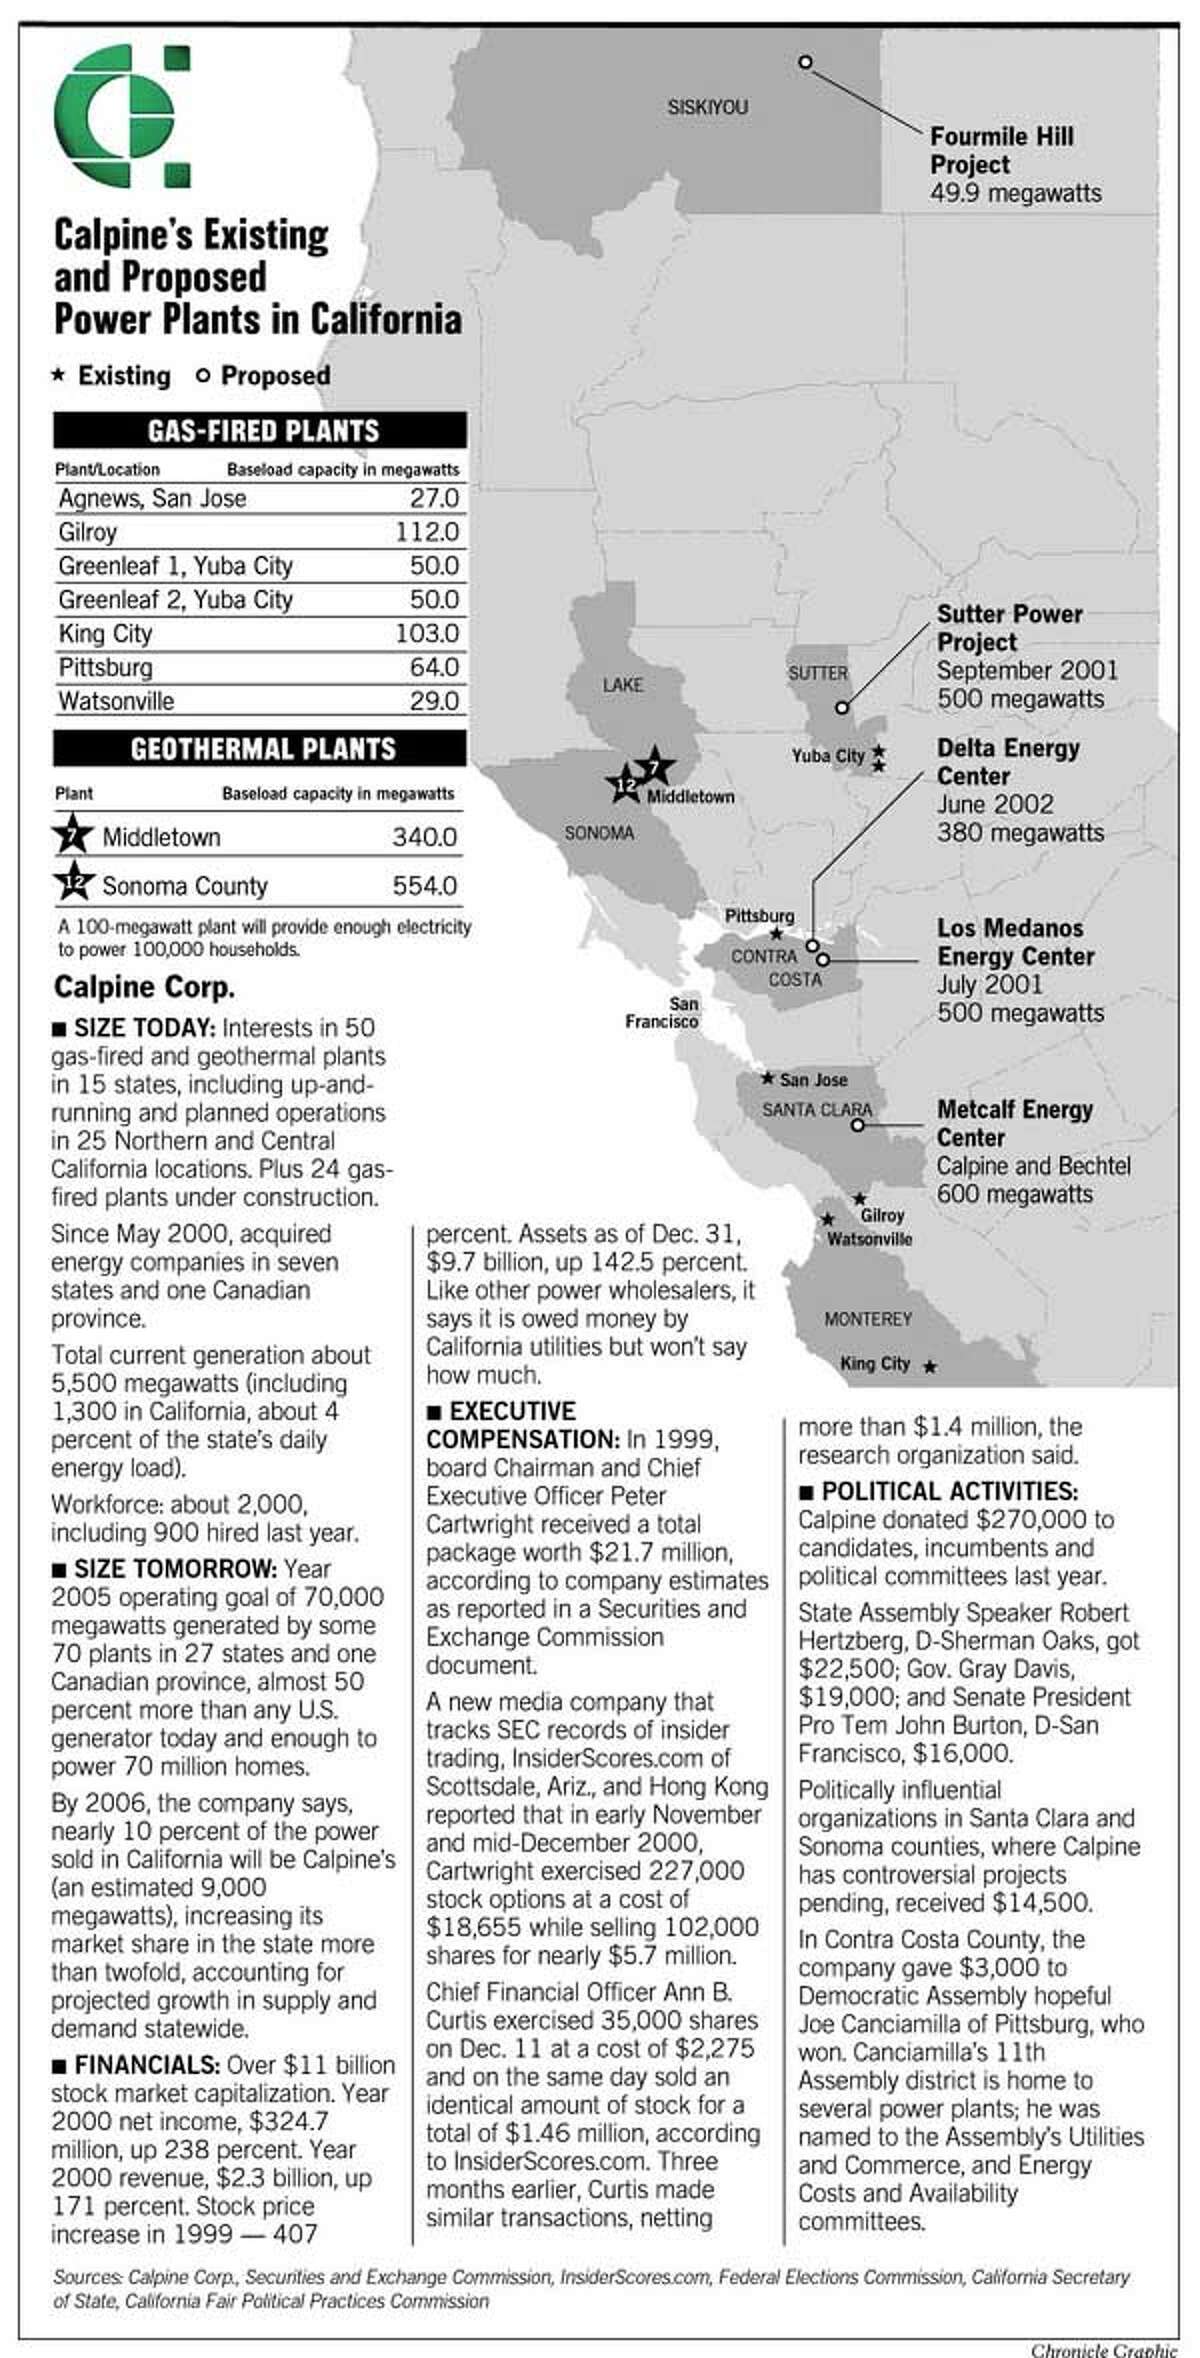 Calpine's Existing and Proposed Power Plants in California. Chronicle Graphic